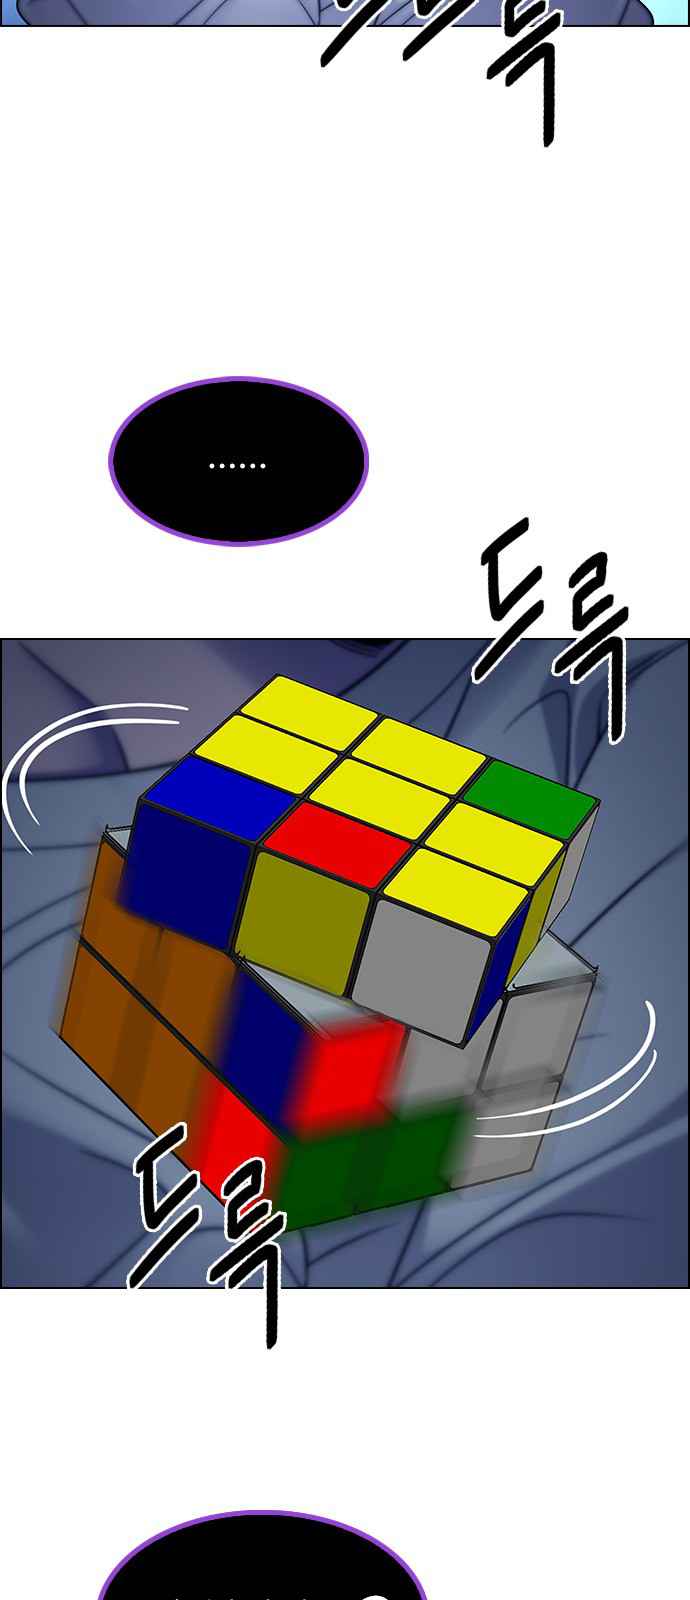 DICE: The Cube that Changes Everything Ch. 266 Dreams end (2)